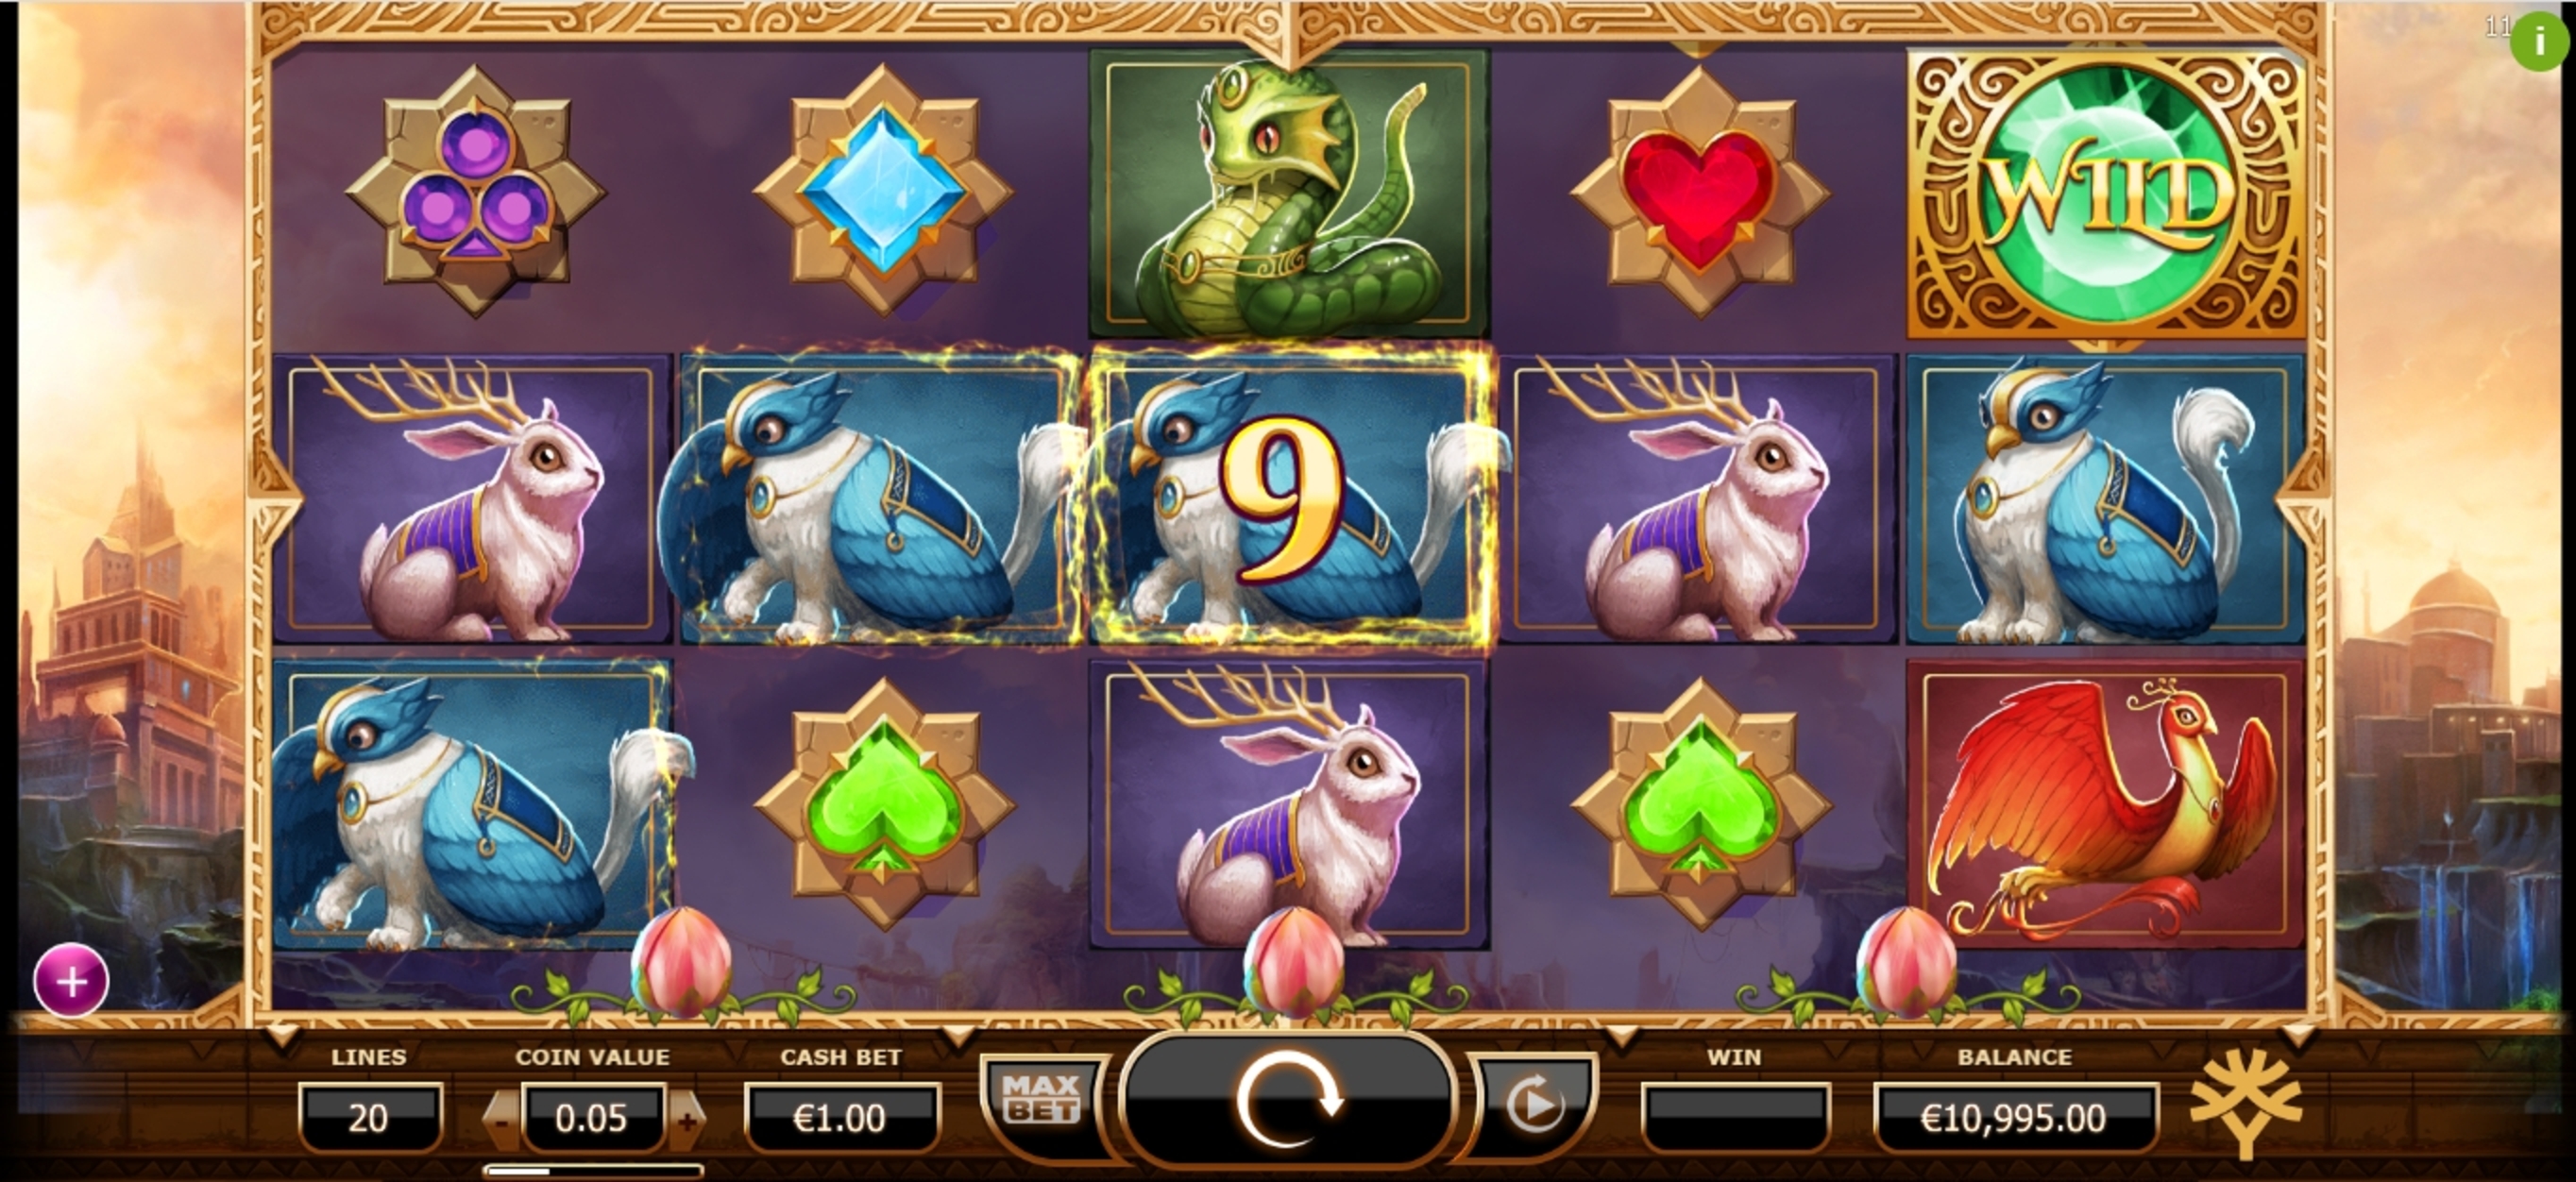 Win Money in Nirvana Free Slot Game by Yggdrasil Gaming